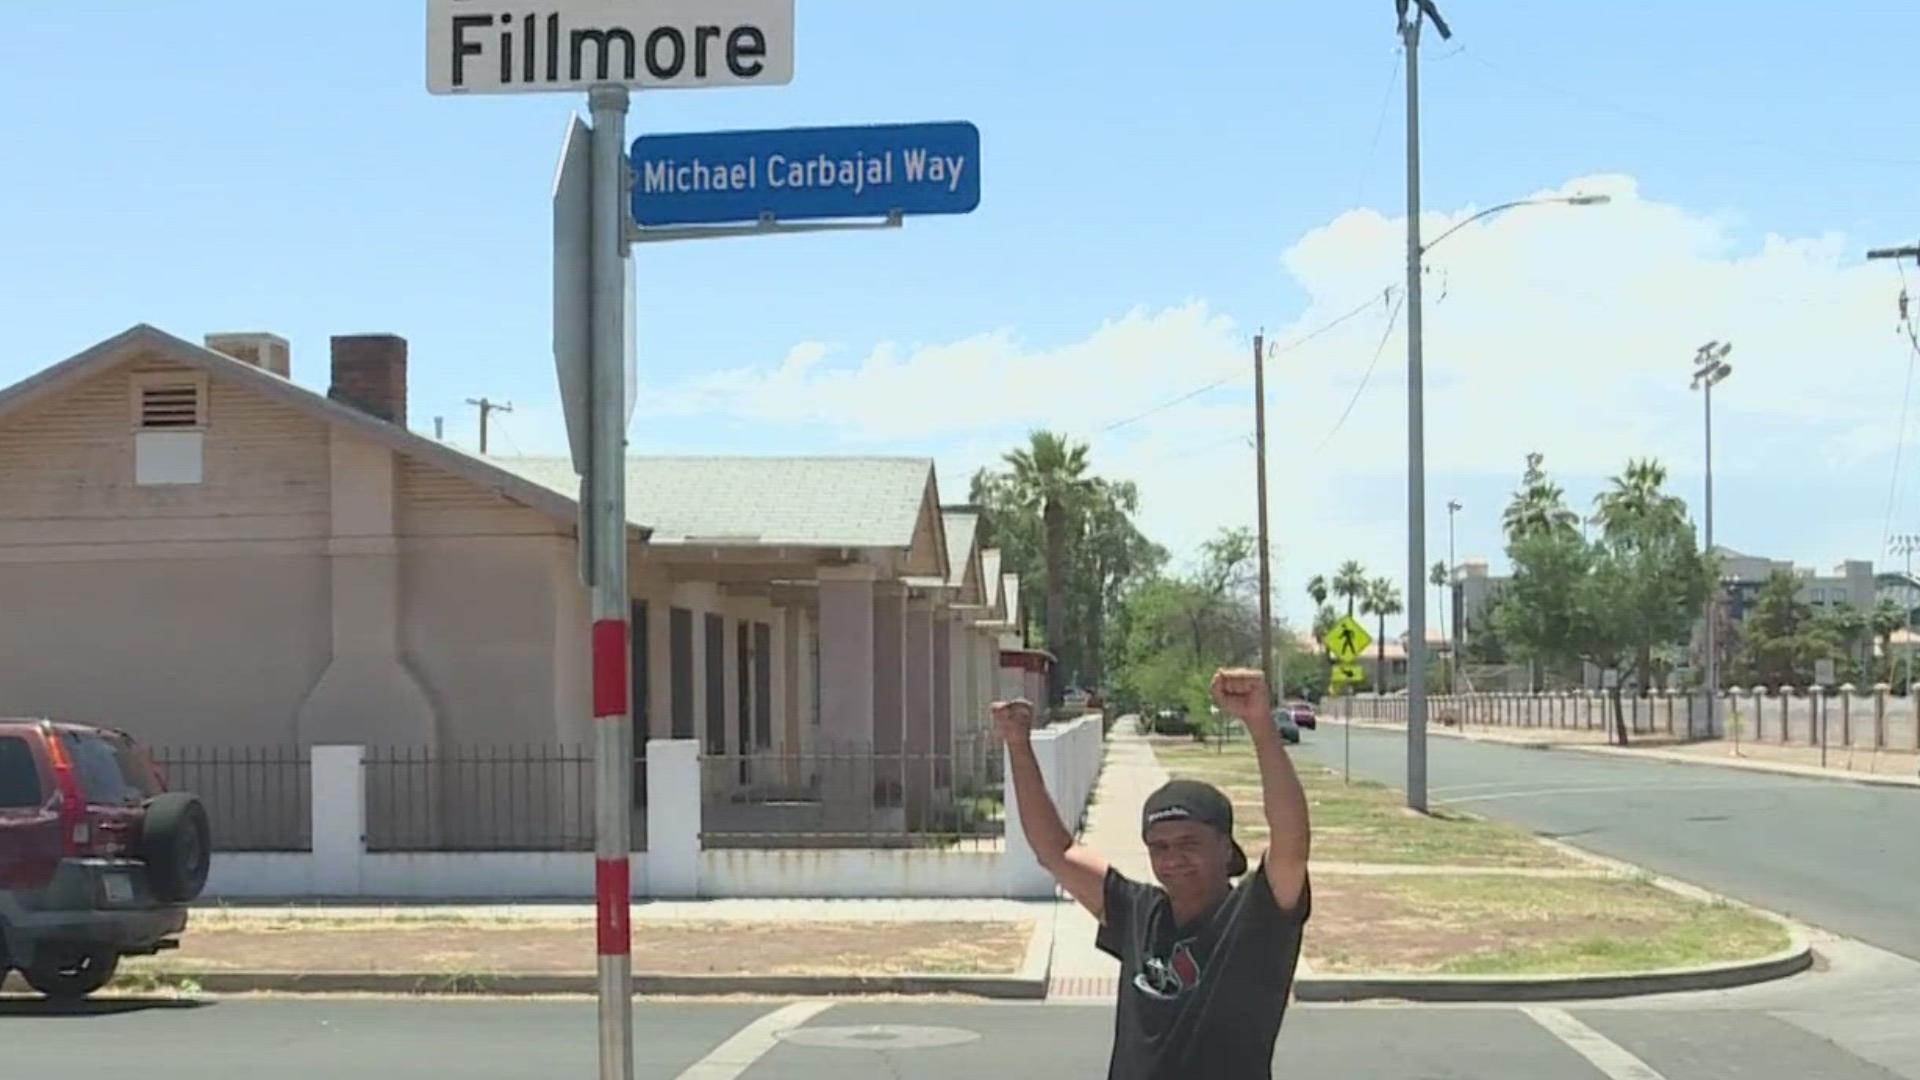 City of Phoenix renames Fillmore Street from 9th Street to 10th Street to Michael Carbajal Way in honor of the legendary boxer.